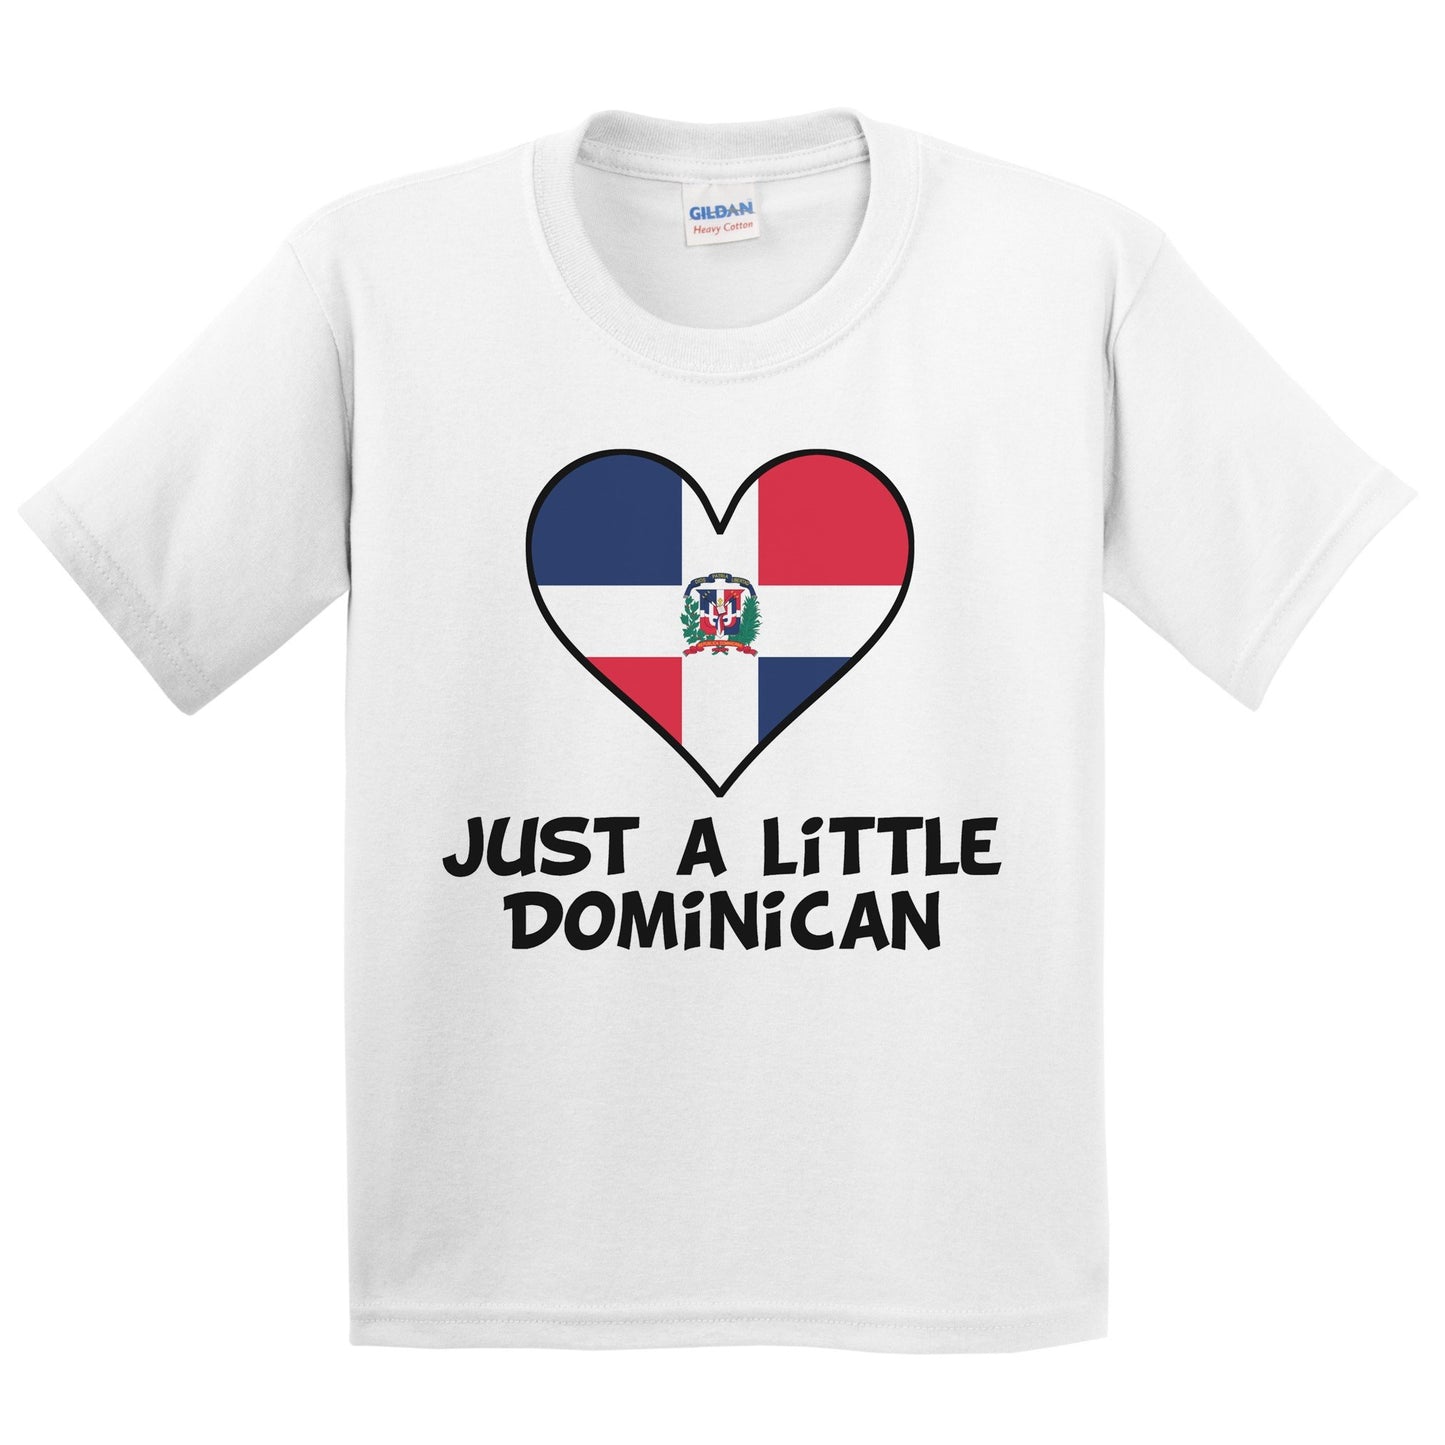 Just A Little Dominican T-Shirt - Funny Dominican Republic Flag Kids Youth Shirt